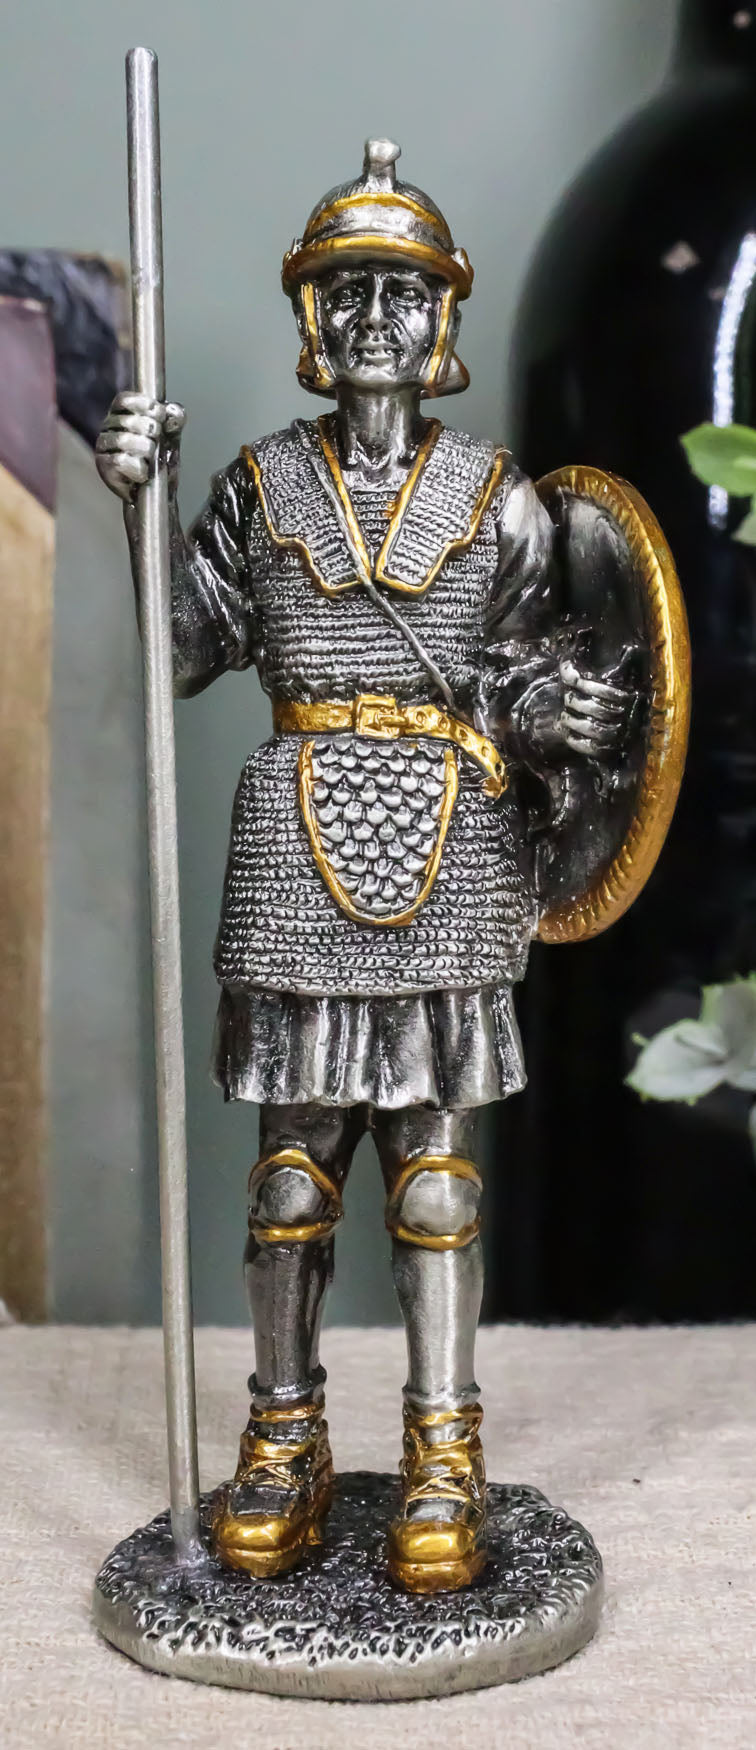 Pewter Medieval Halberdier Knight Guard With Pole Spear And Shield Figurine